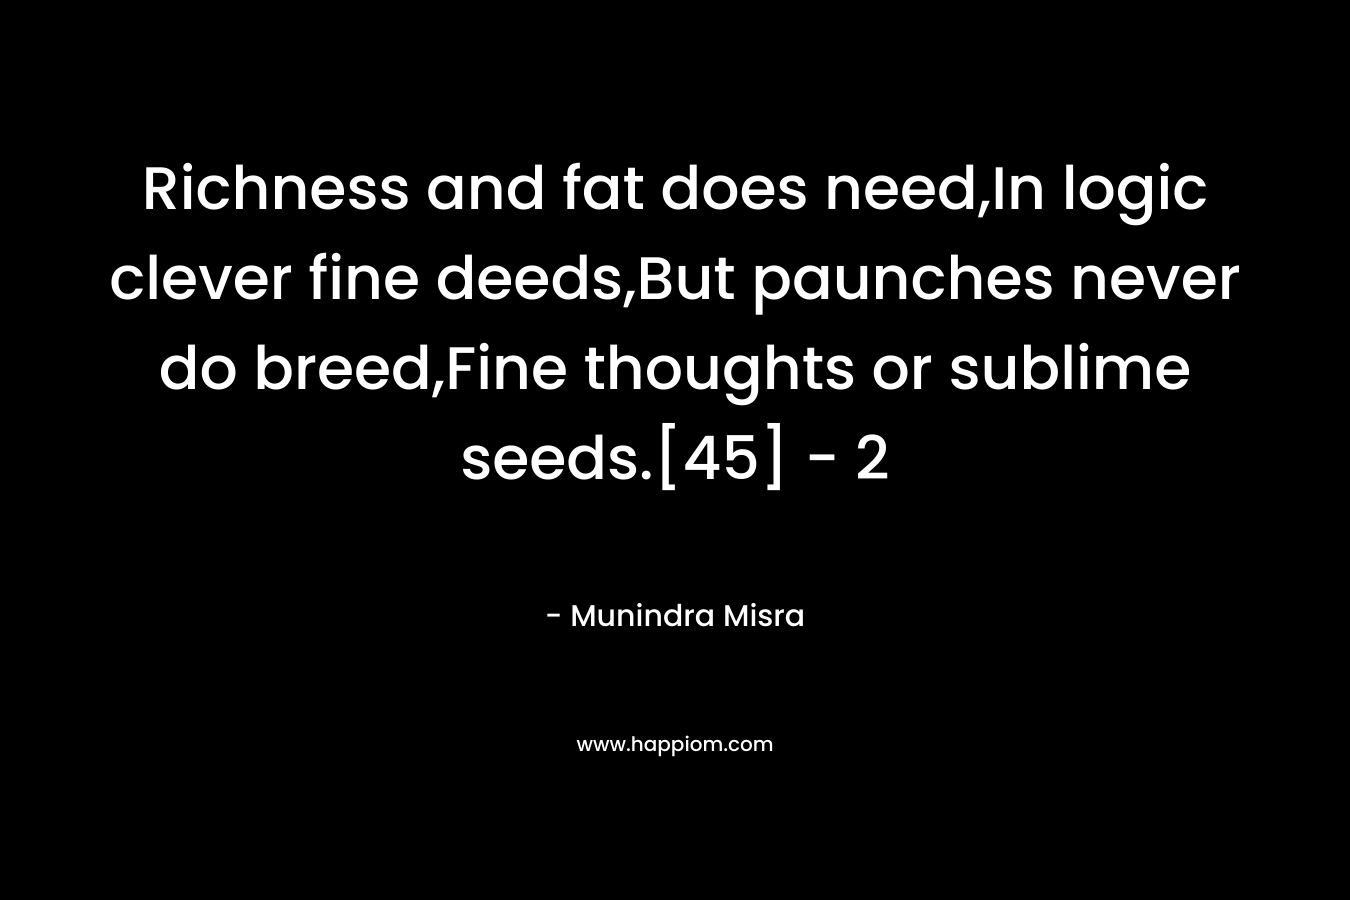 Richness and fat does need,In logic clever fine deeds,But paunches never do breed,Fine thoughts or sublime seeds.[45]	- 2